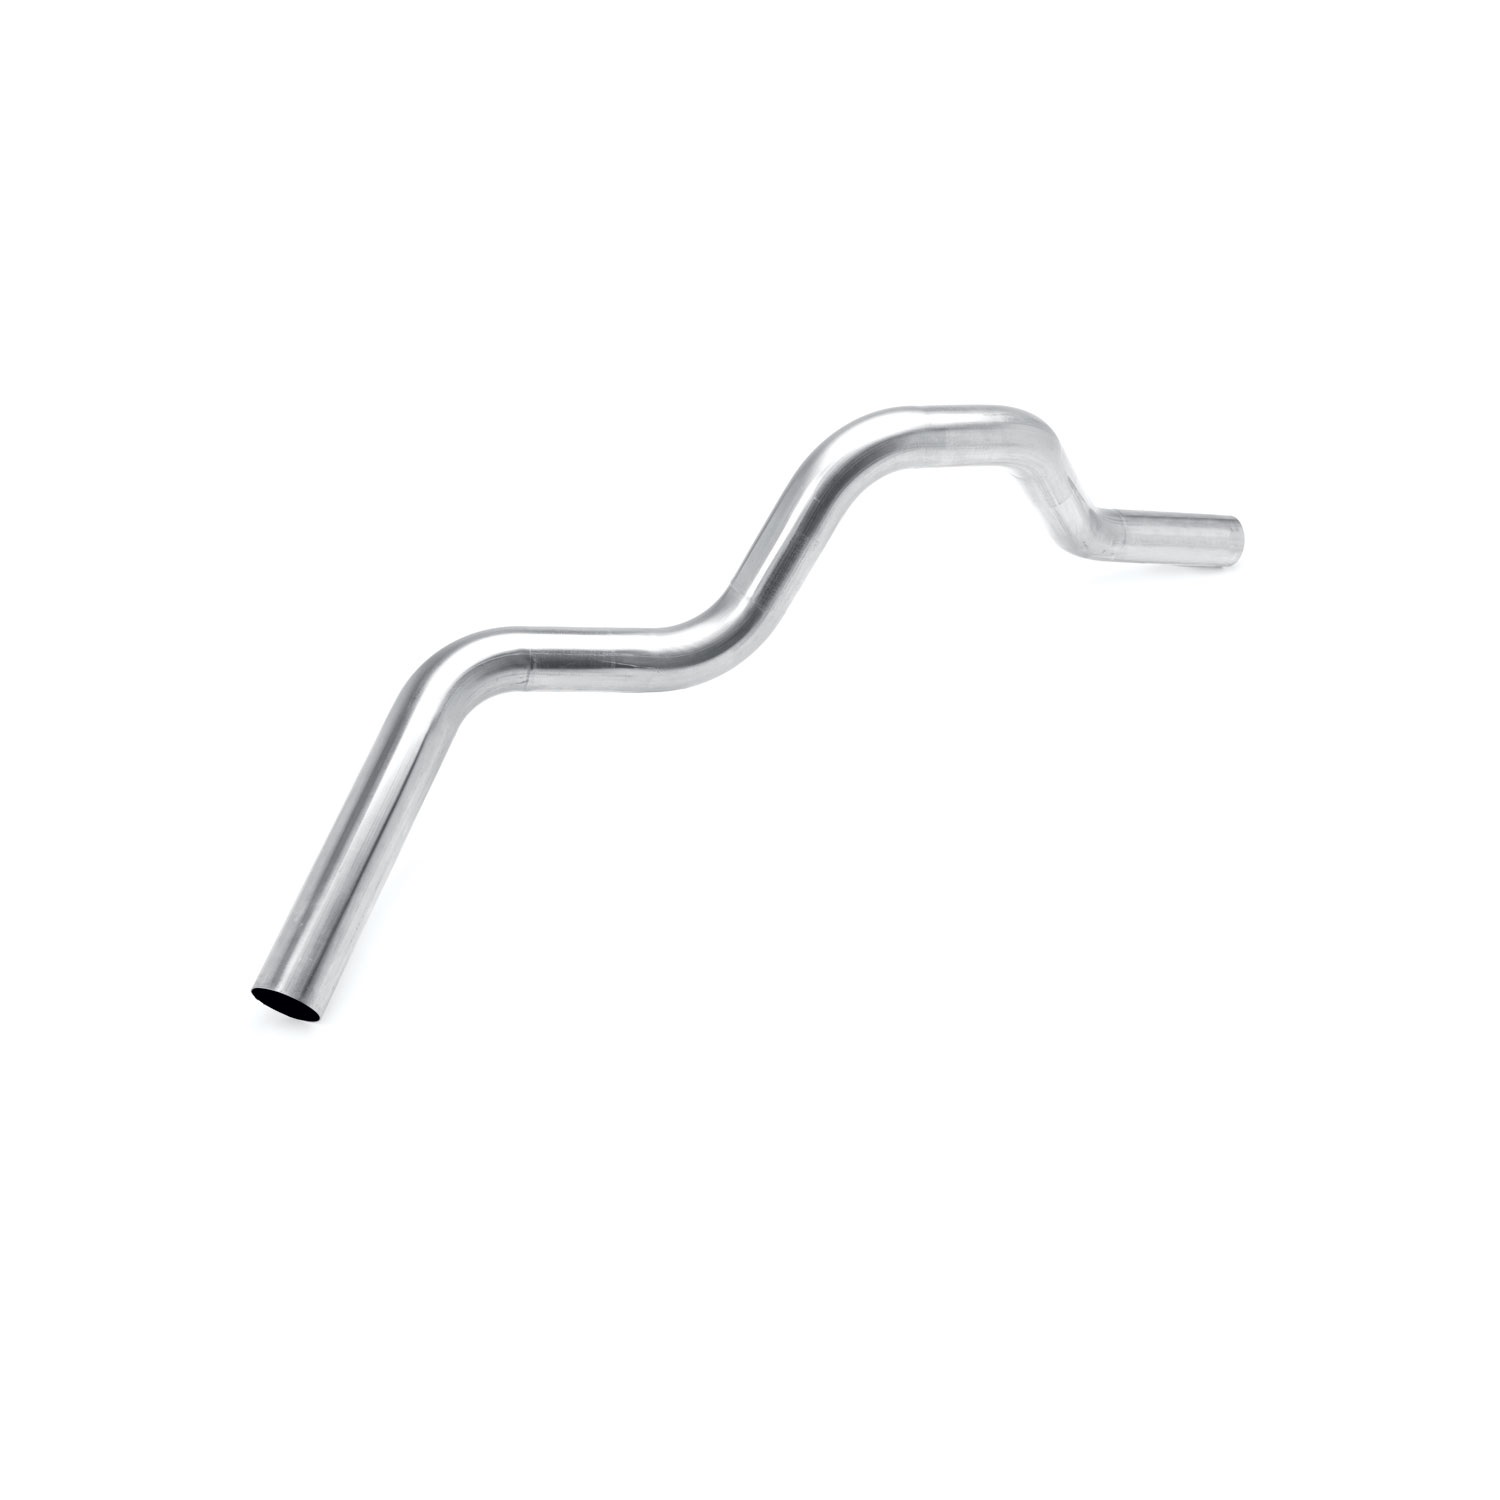 Magnaflow Performance Exhaust Magnaflow Performance Exhaust 15047 Stainless Steel Tail Pipe